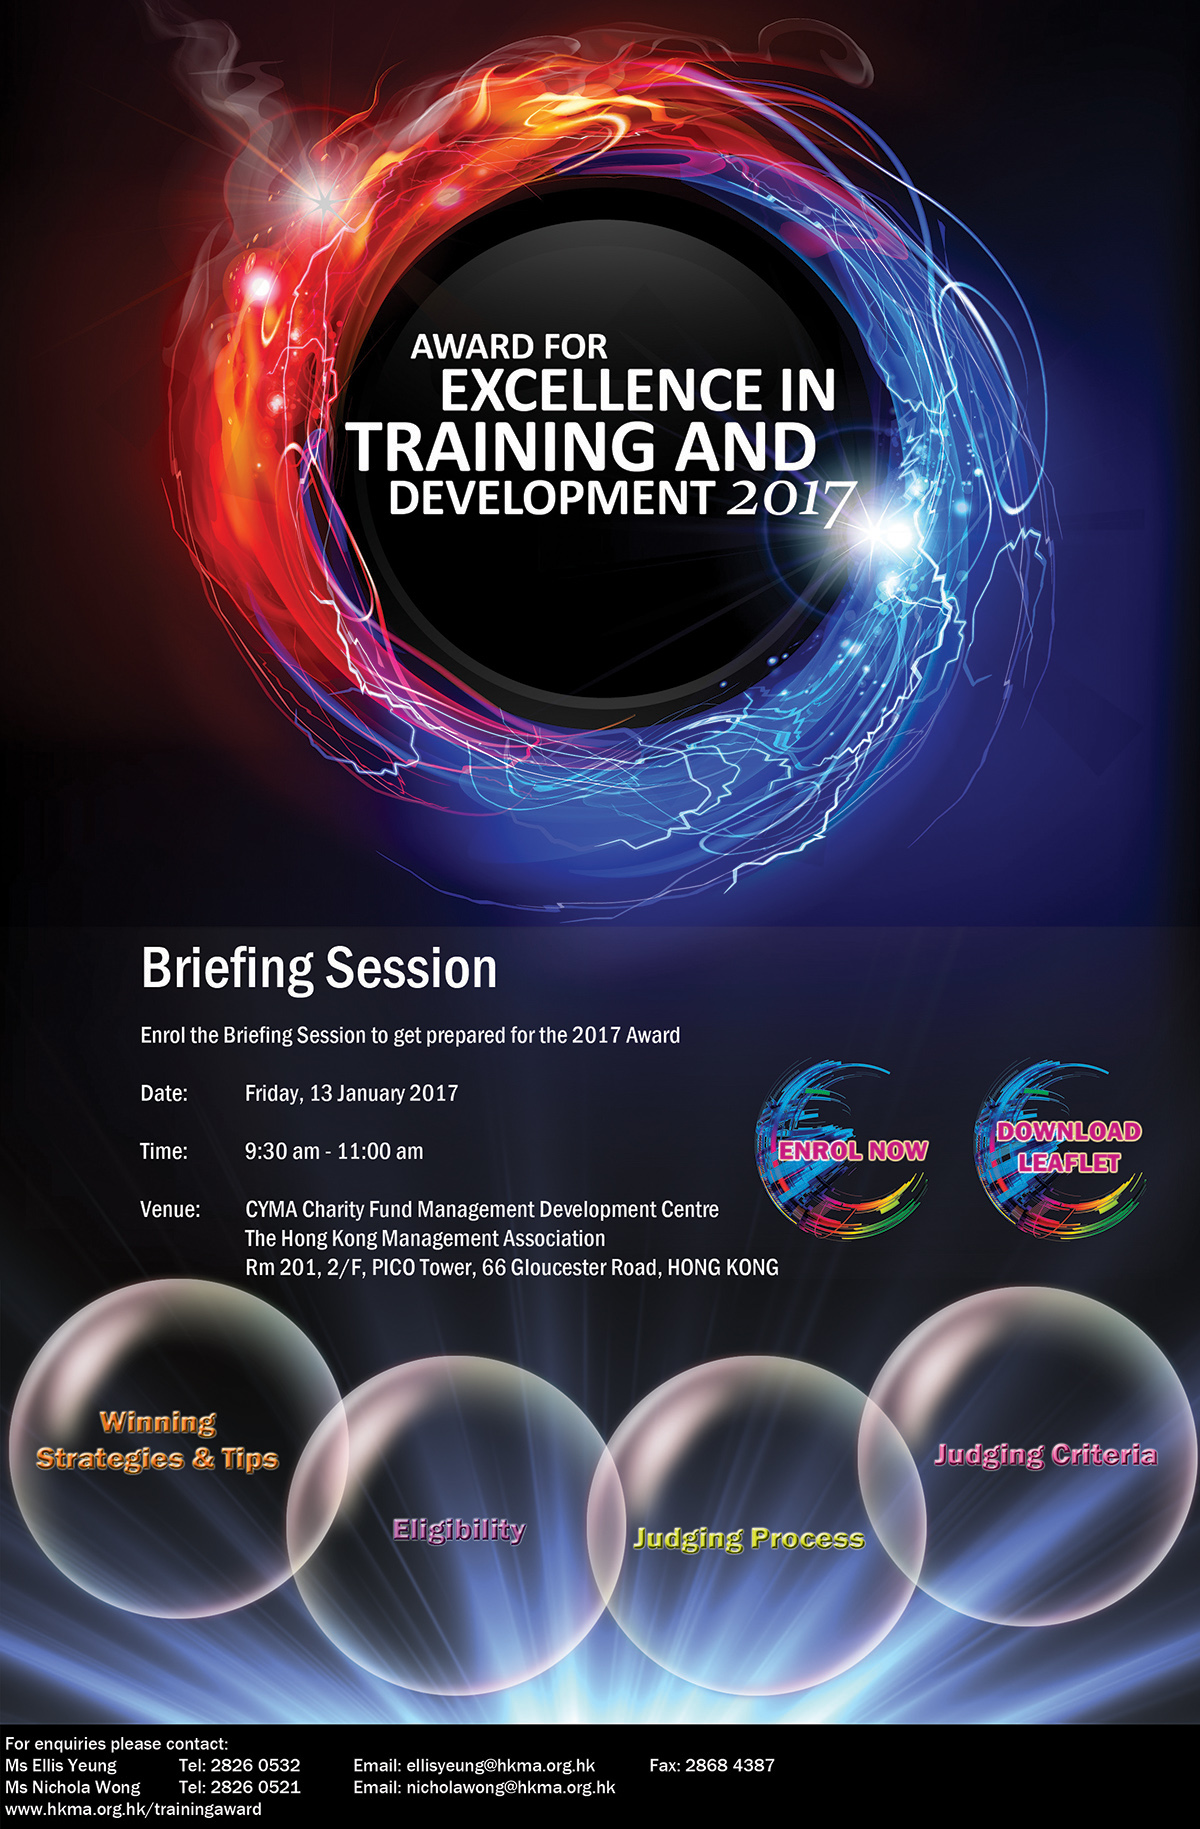 Award for Excellence in Training and Development 2017